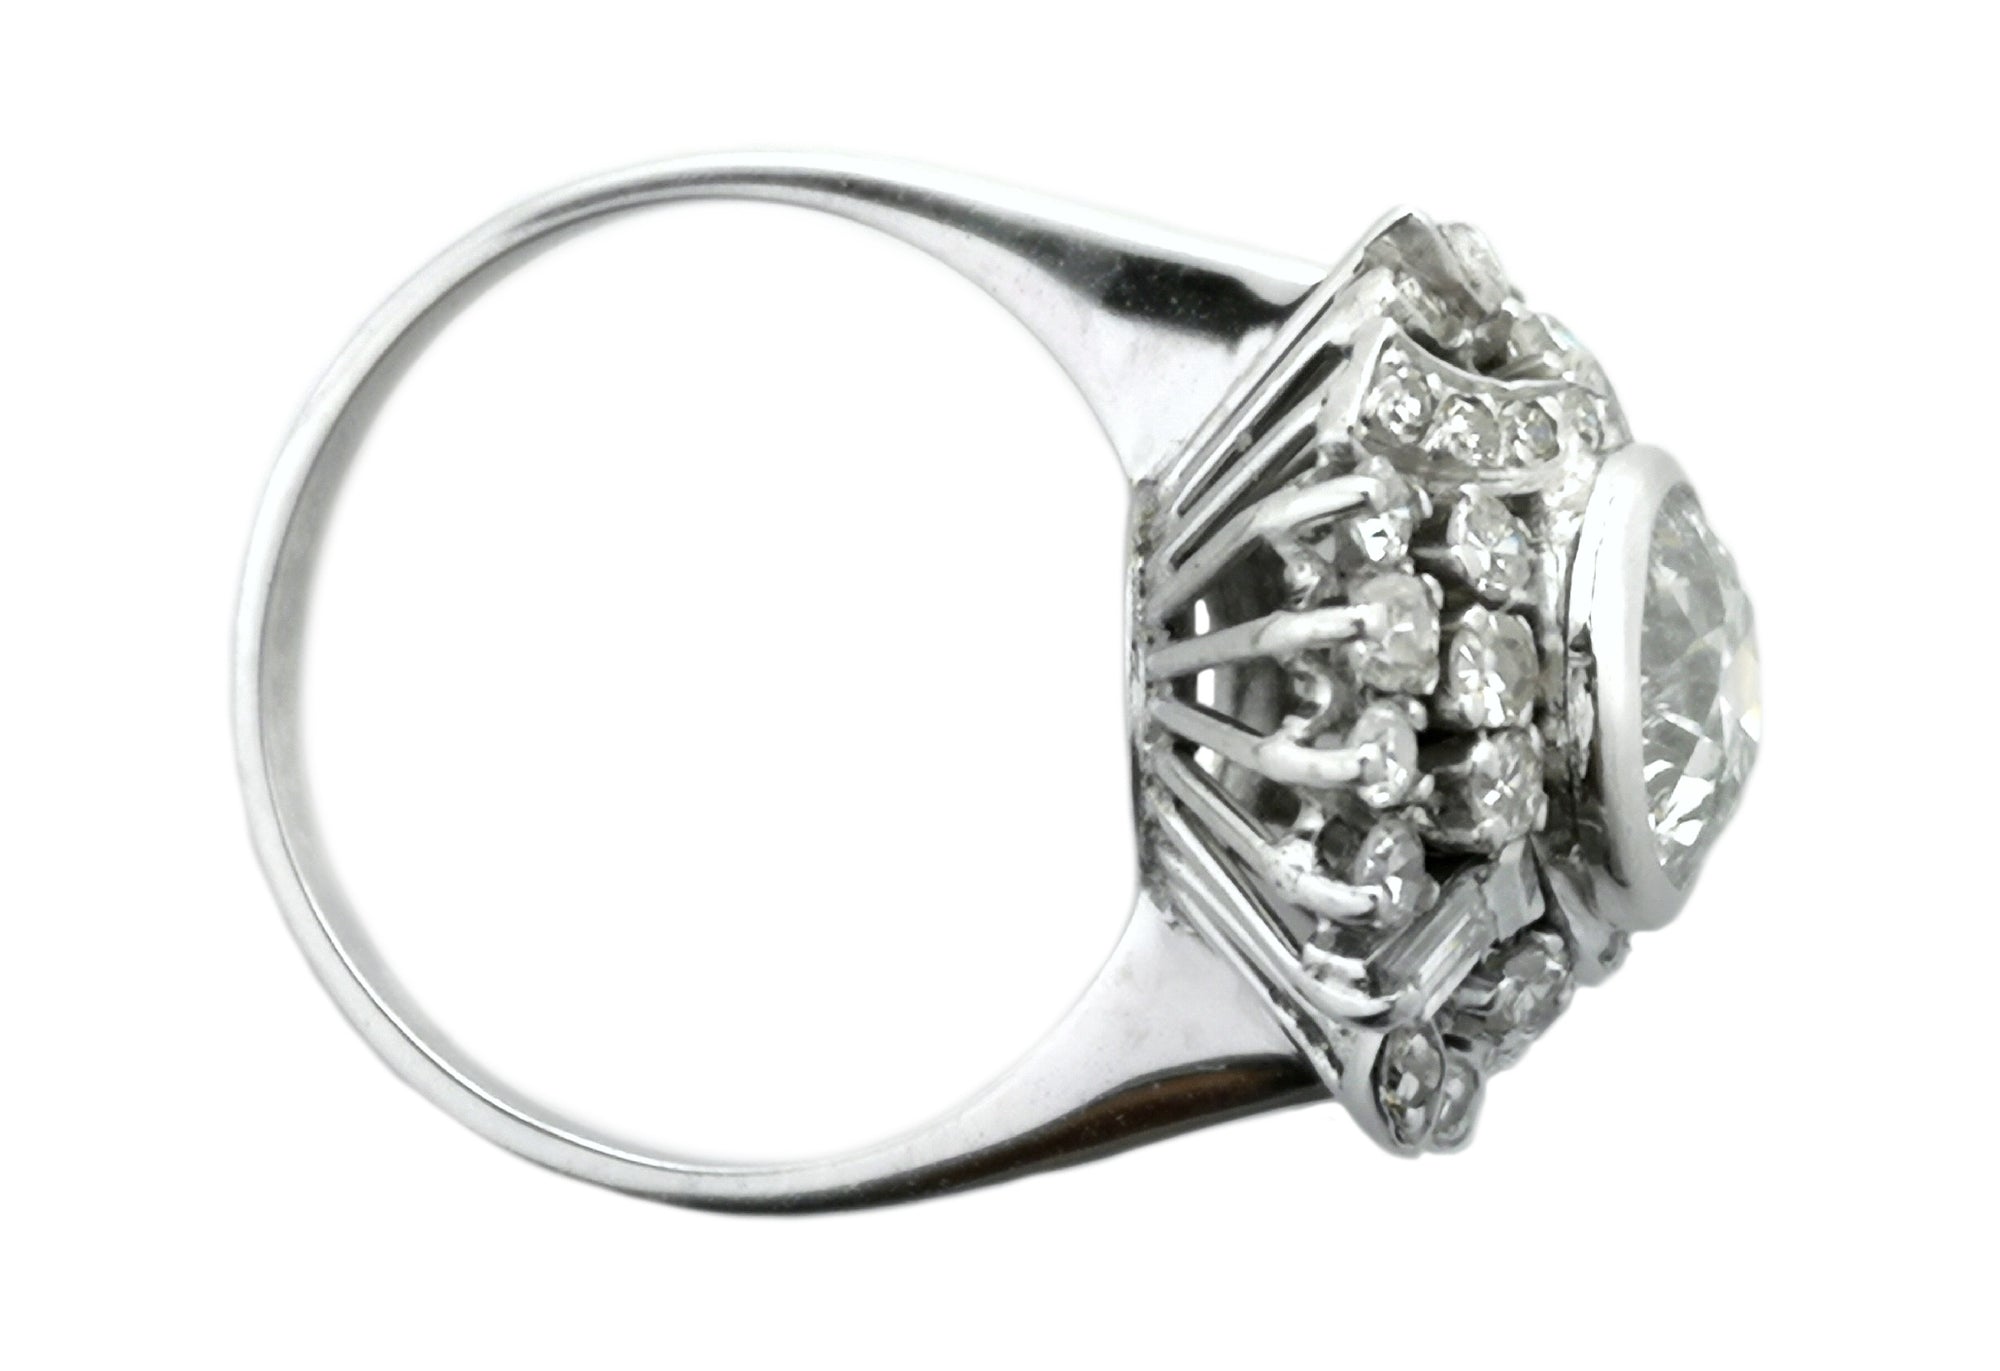 1950s French Mid-Century 2.15tcw G/SI2 Old Cut Diamond Cluster Engagement Ring